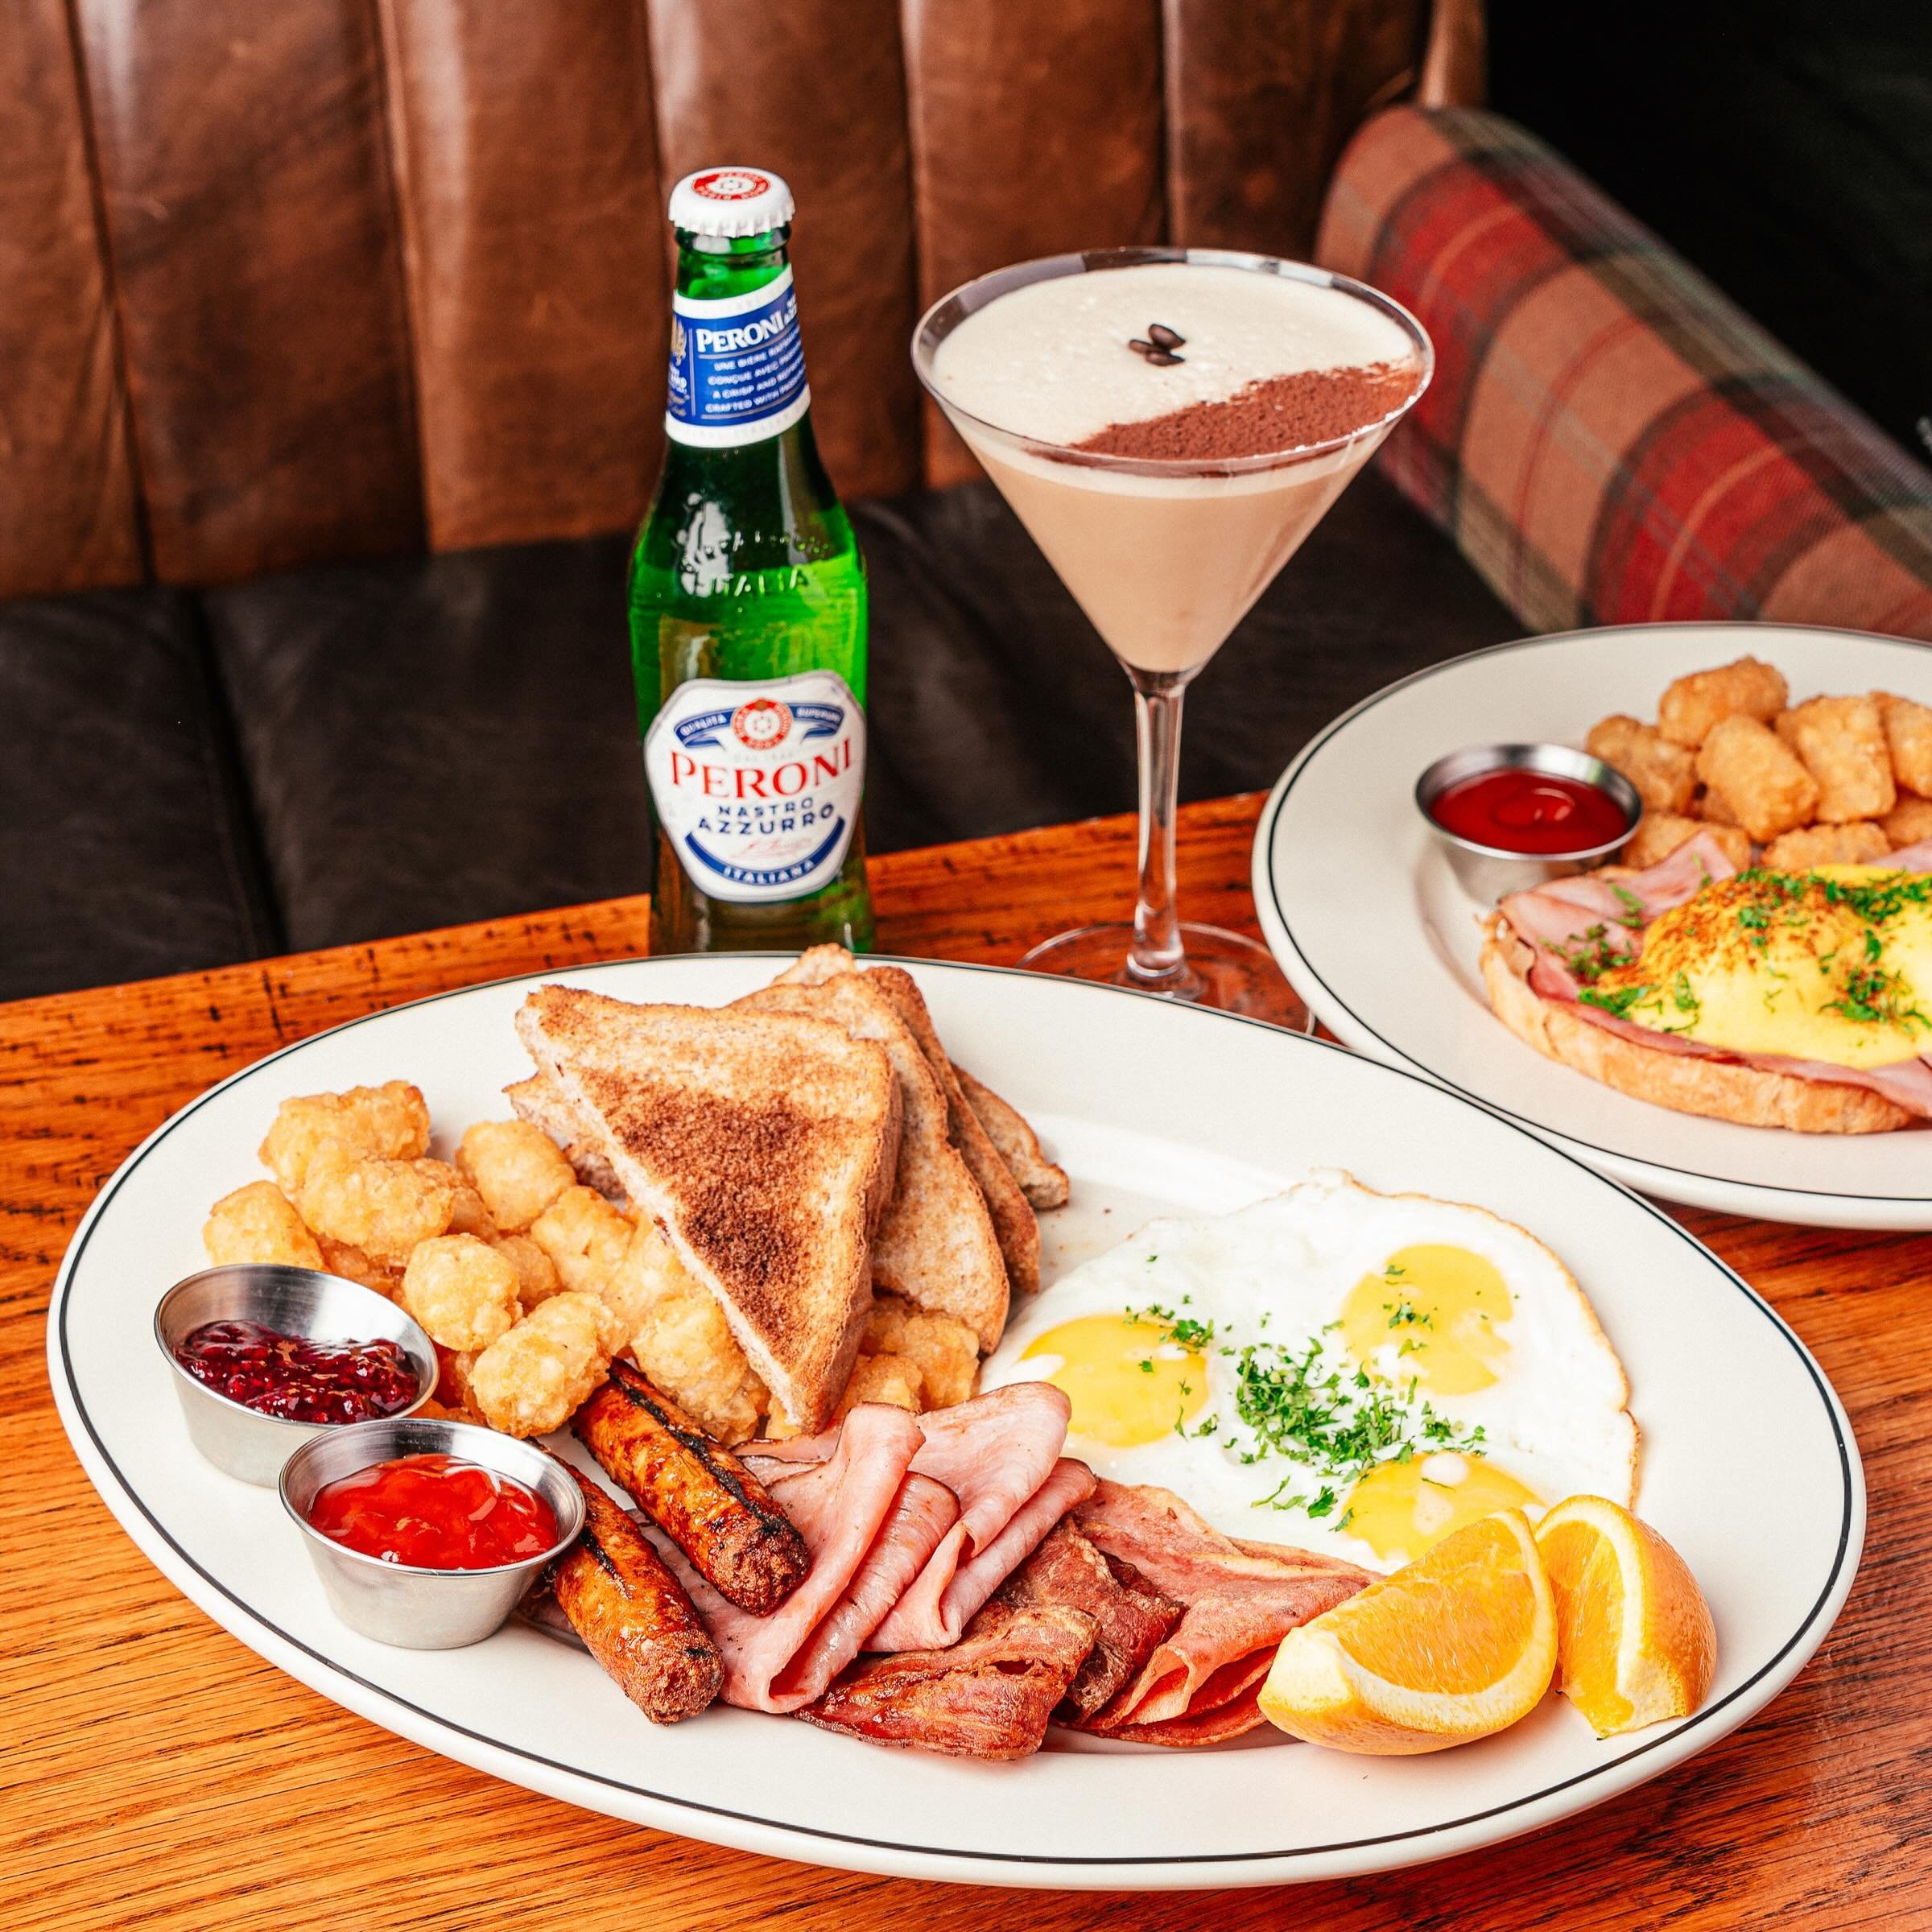 Introducing our Ultimate Breaky to our brunch menu! Dive into 3 Eggs, Ham, Turkey Bacon, Chicken Sausage, and bacon paired with Toast, Tater Tots and Seasonal Fruits! 🥚 🥓 🐓 🐖 

Join us tomorrow for our Sunday Brunch from 9 AM - 4 PM to experience